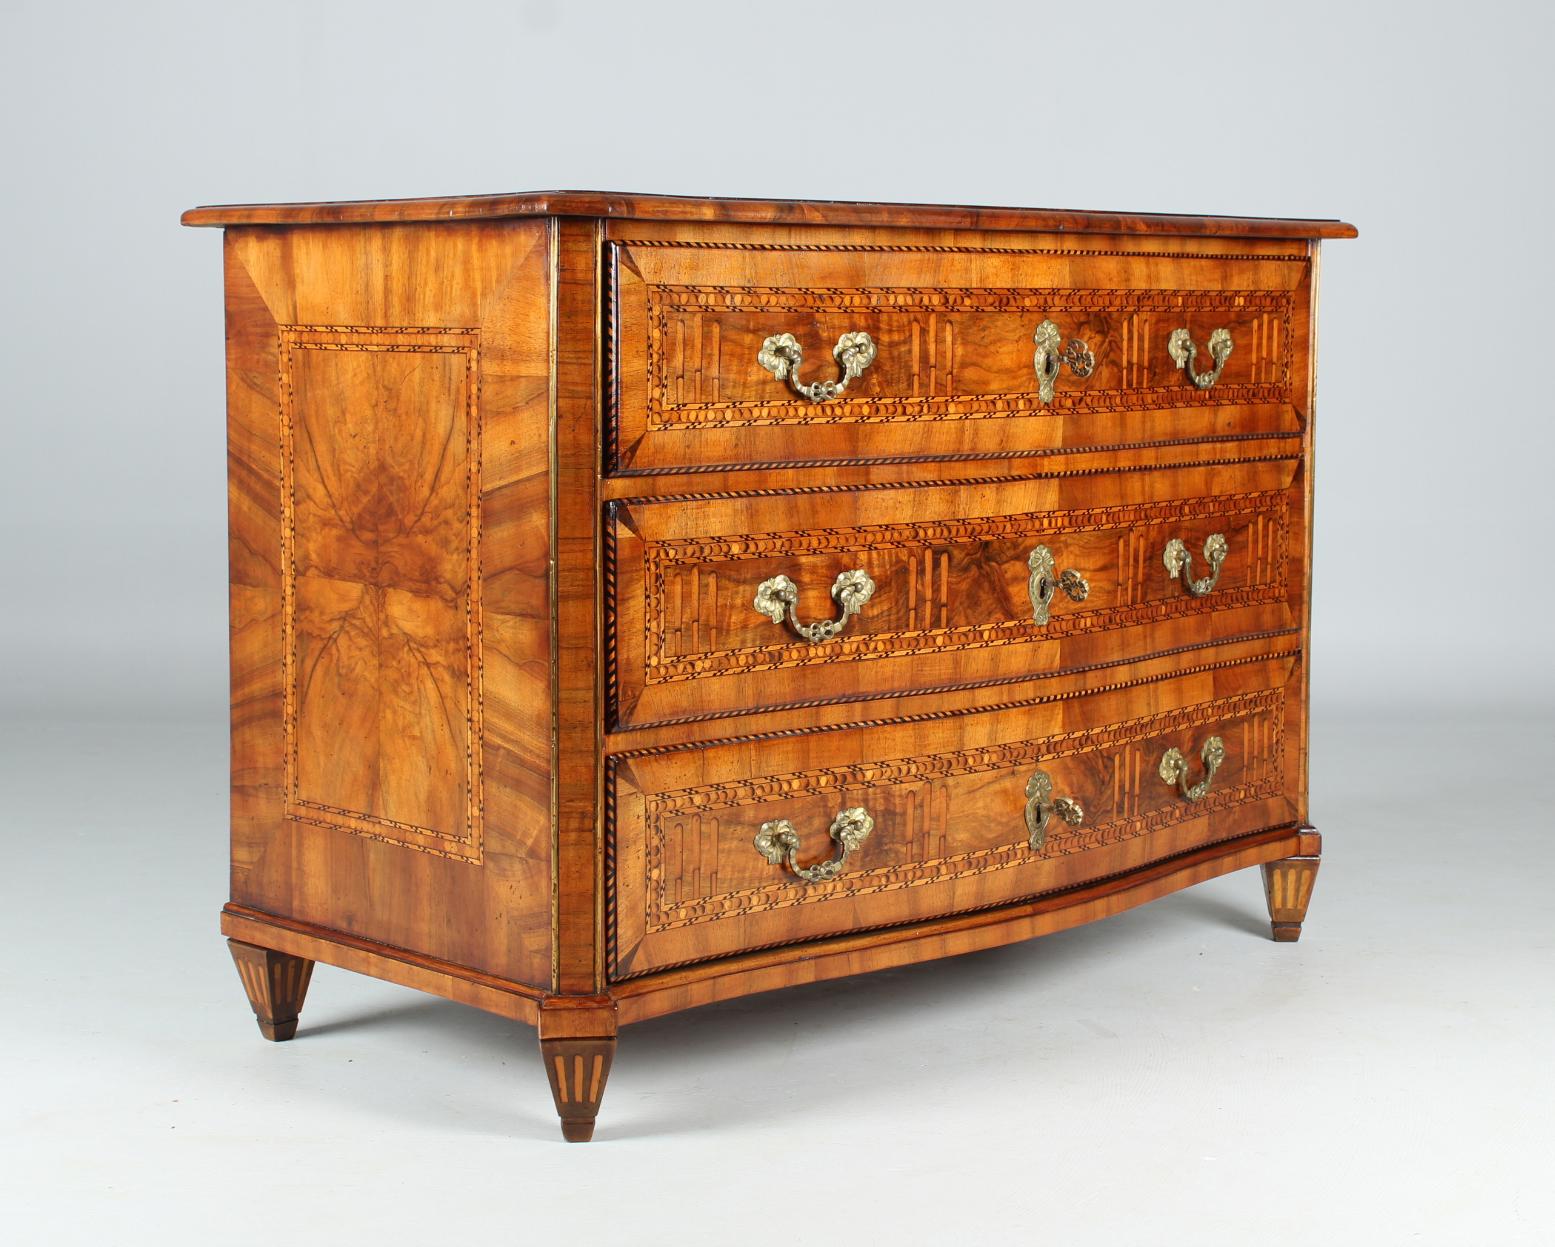 Richly decorated classicist chest of drawers

Dresden
Walnut a.o.
Plait style around 1785

Dimensions: H x W x D: 85 x 122 x 63 cm

Description:
Fine and detailed chest of drawers of the German classicism, the so-called Zopfstil. The design